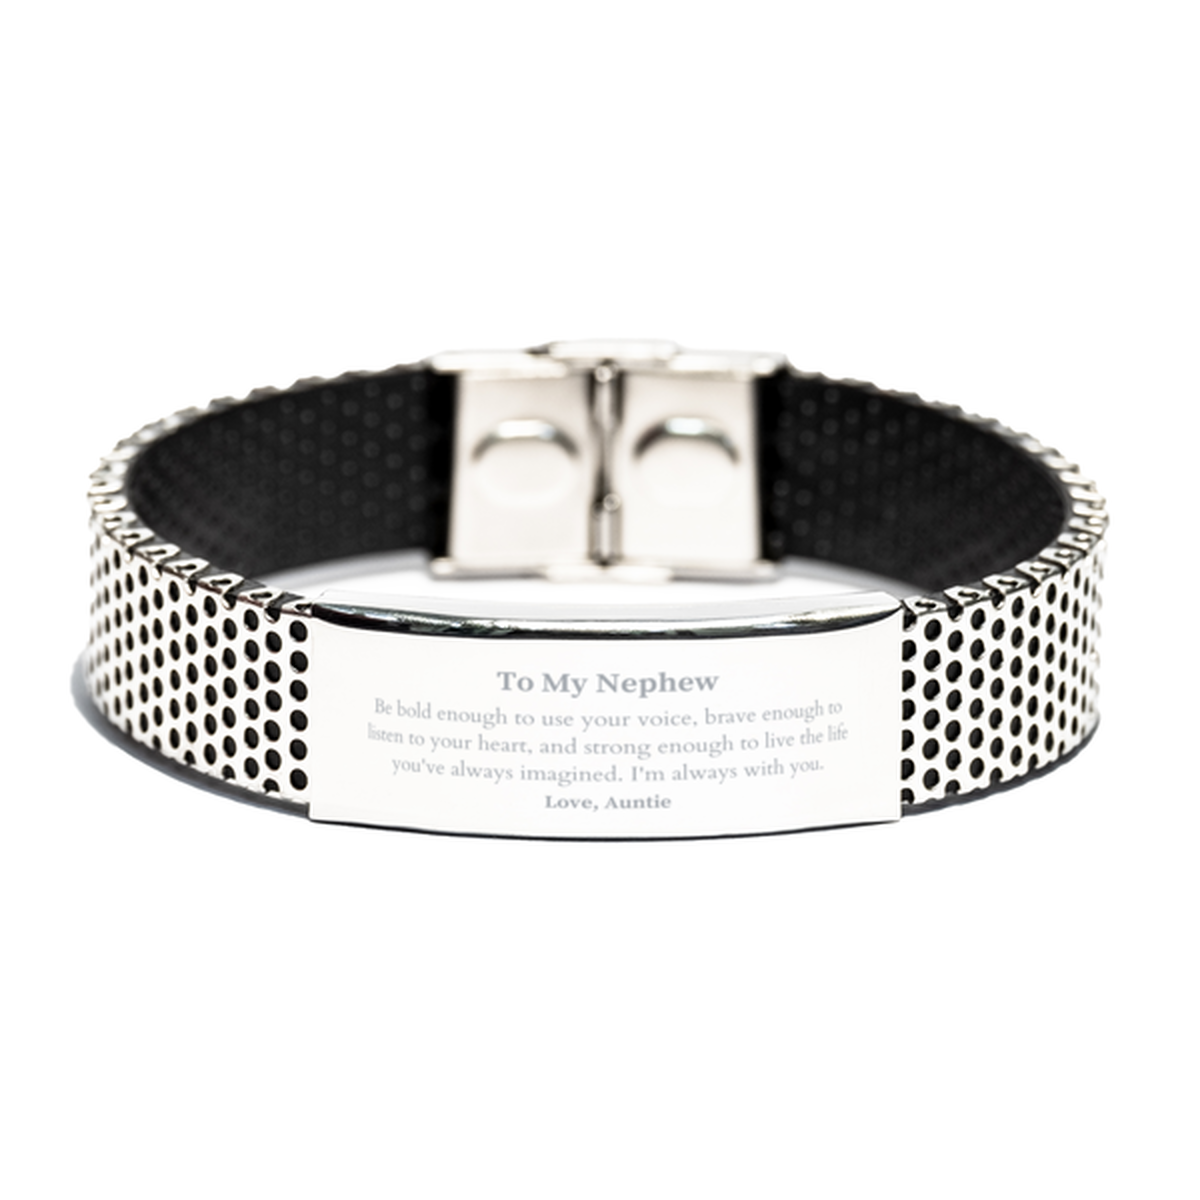 Keepsake Nephew Stainless Steel Bracelet Gift Idea Graduation Christmas Birthday Nephew from Auntie, Nephew Be bold enough to use your voice, brave enough to listen to your heart. Love, Auntie